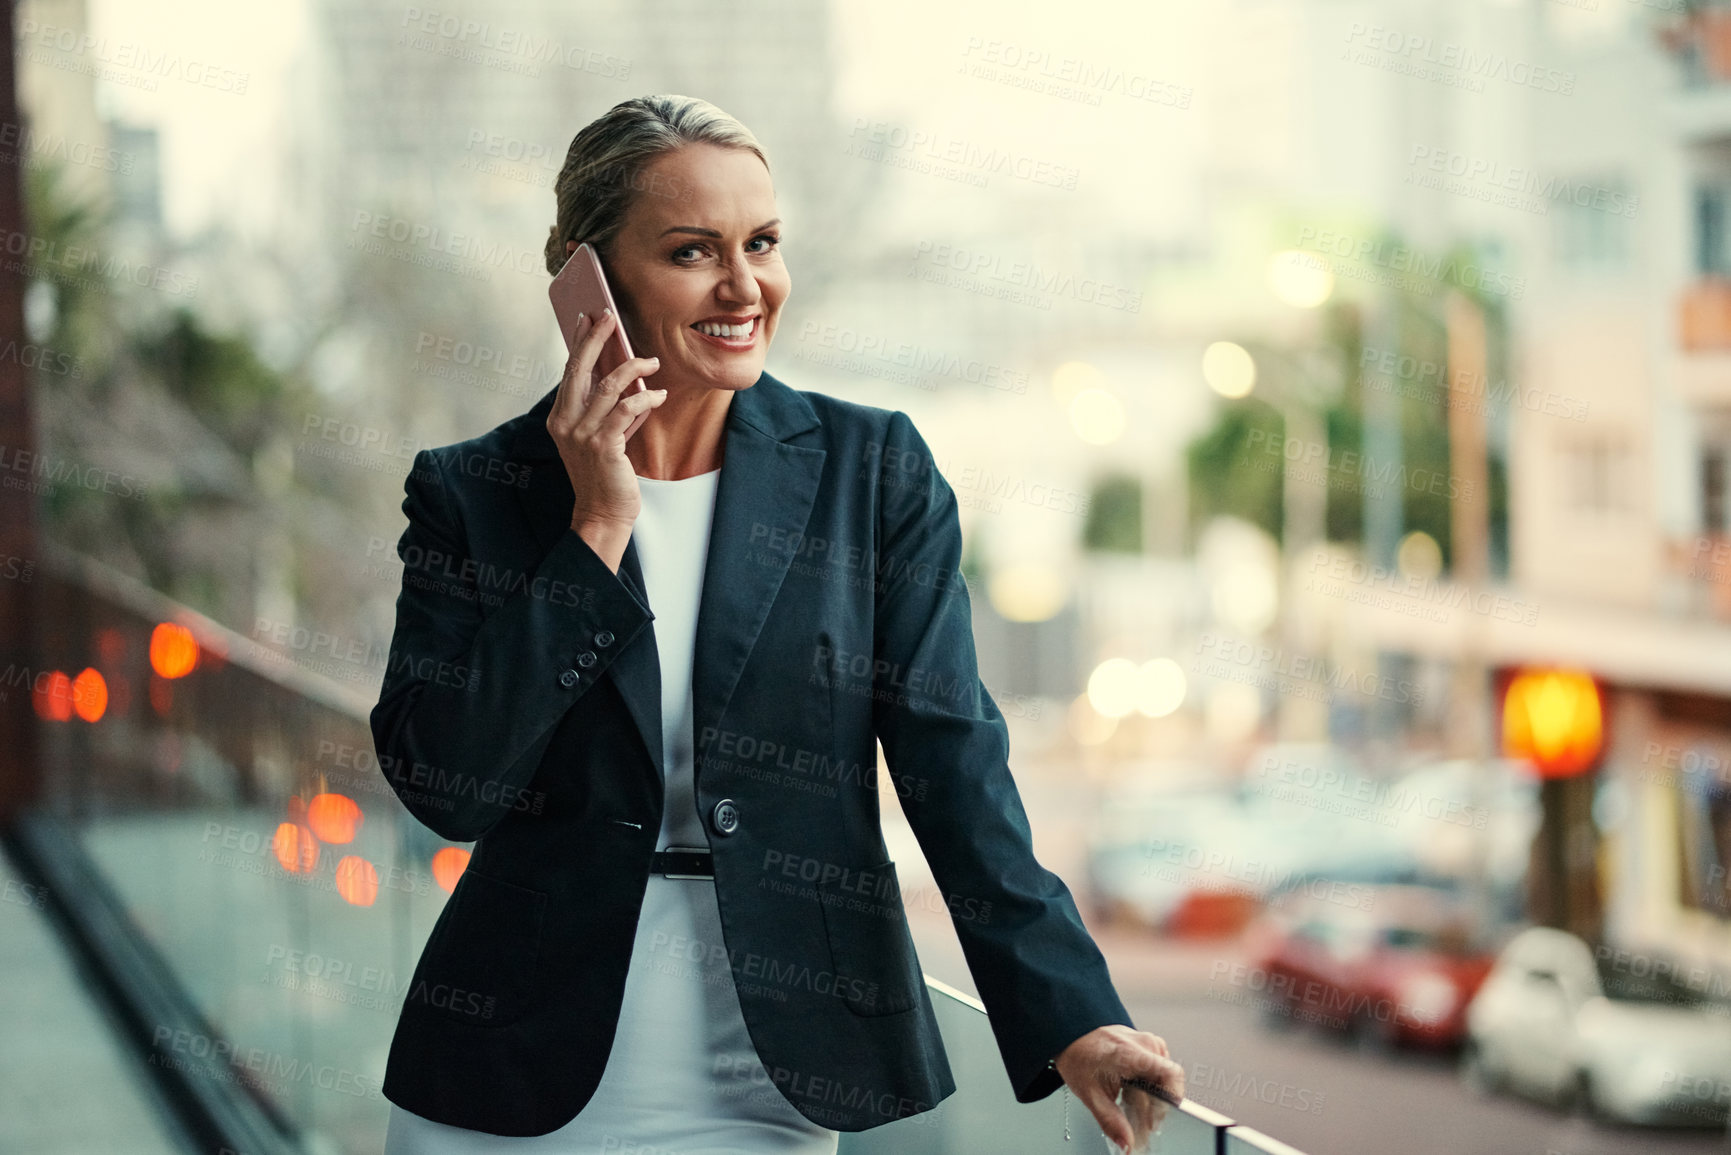 Buy stock photo Cropped portrait of an attractive mature businesswoman using her cellphone while standing on the balcony of her office